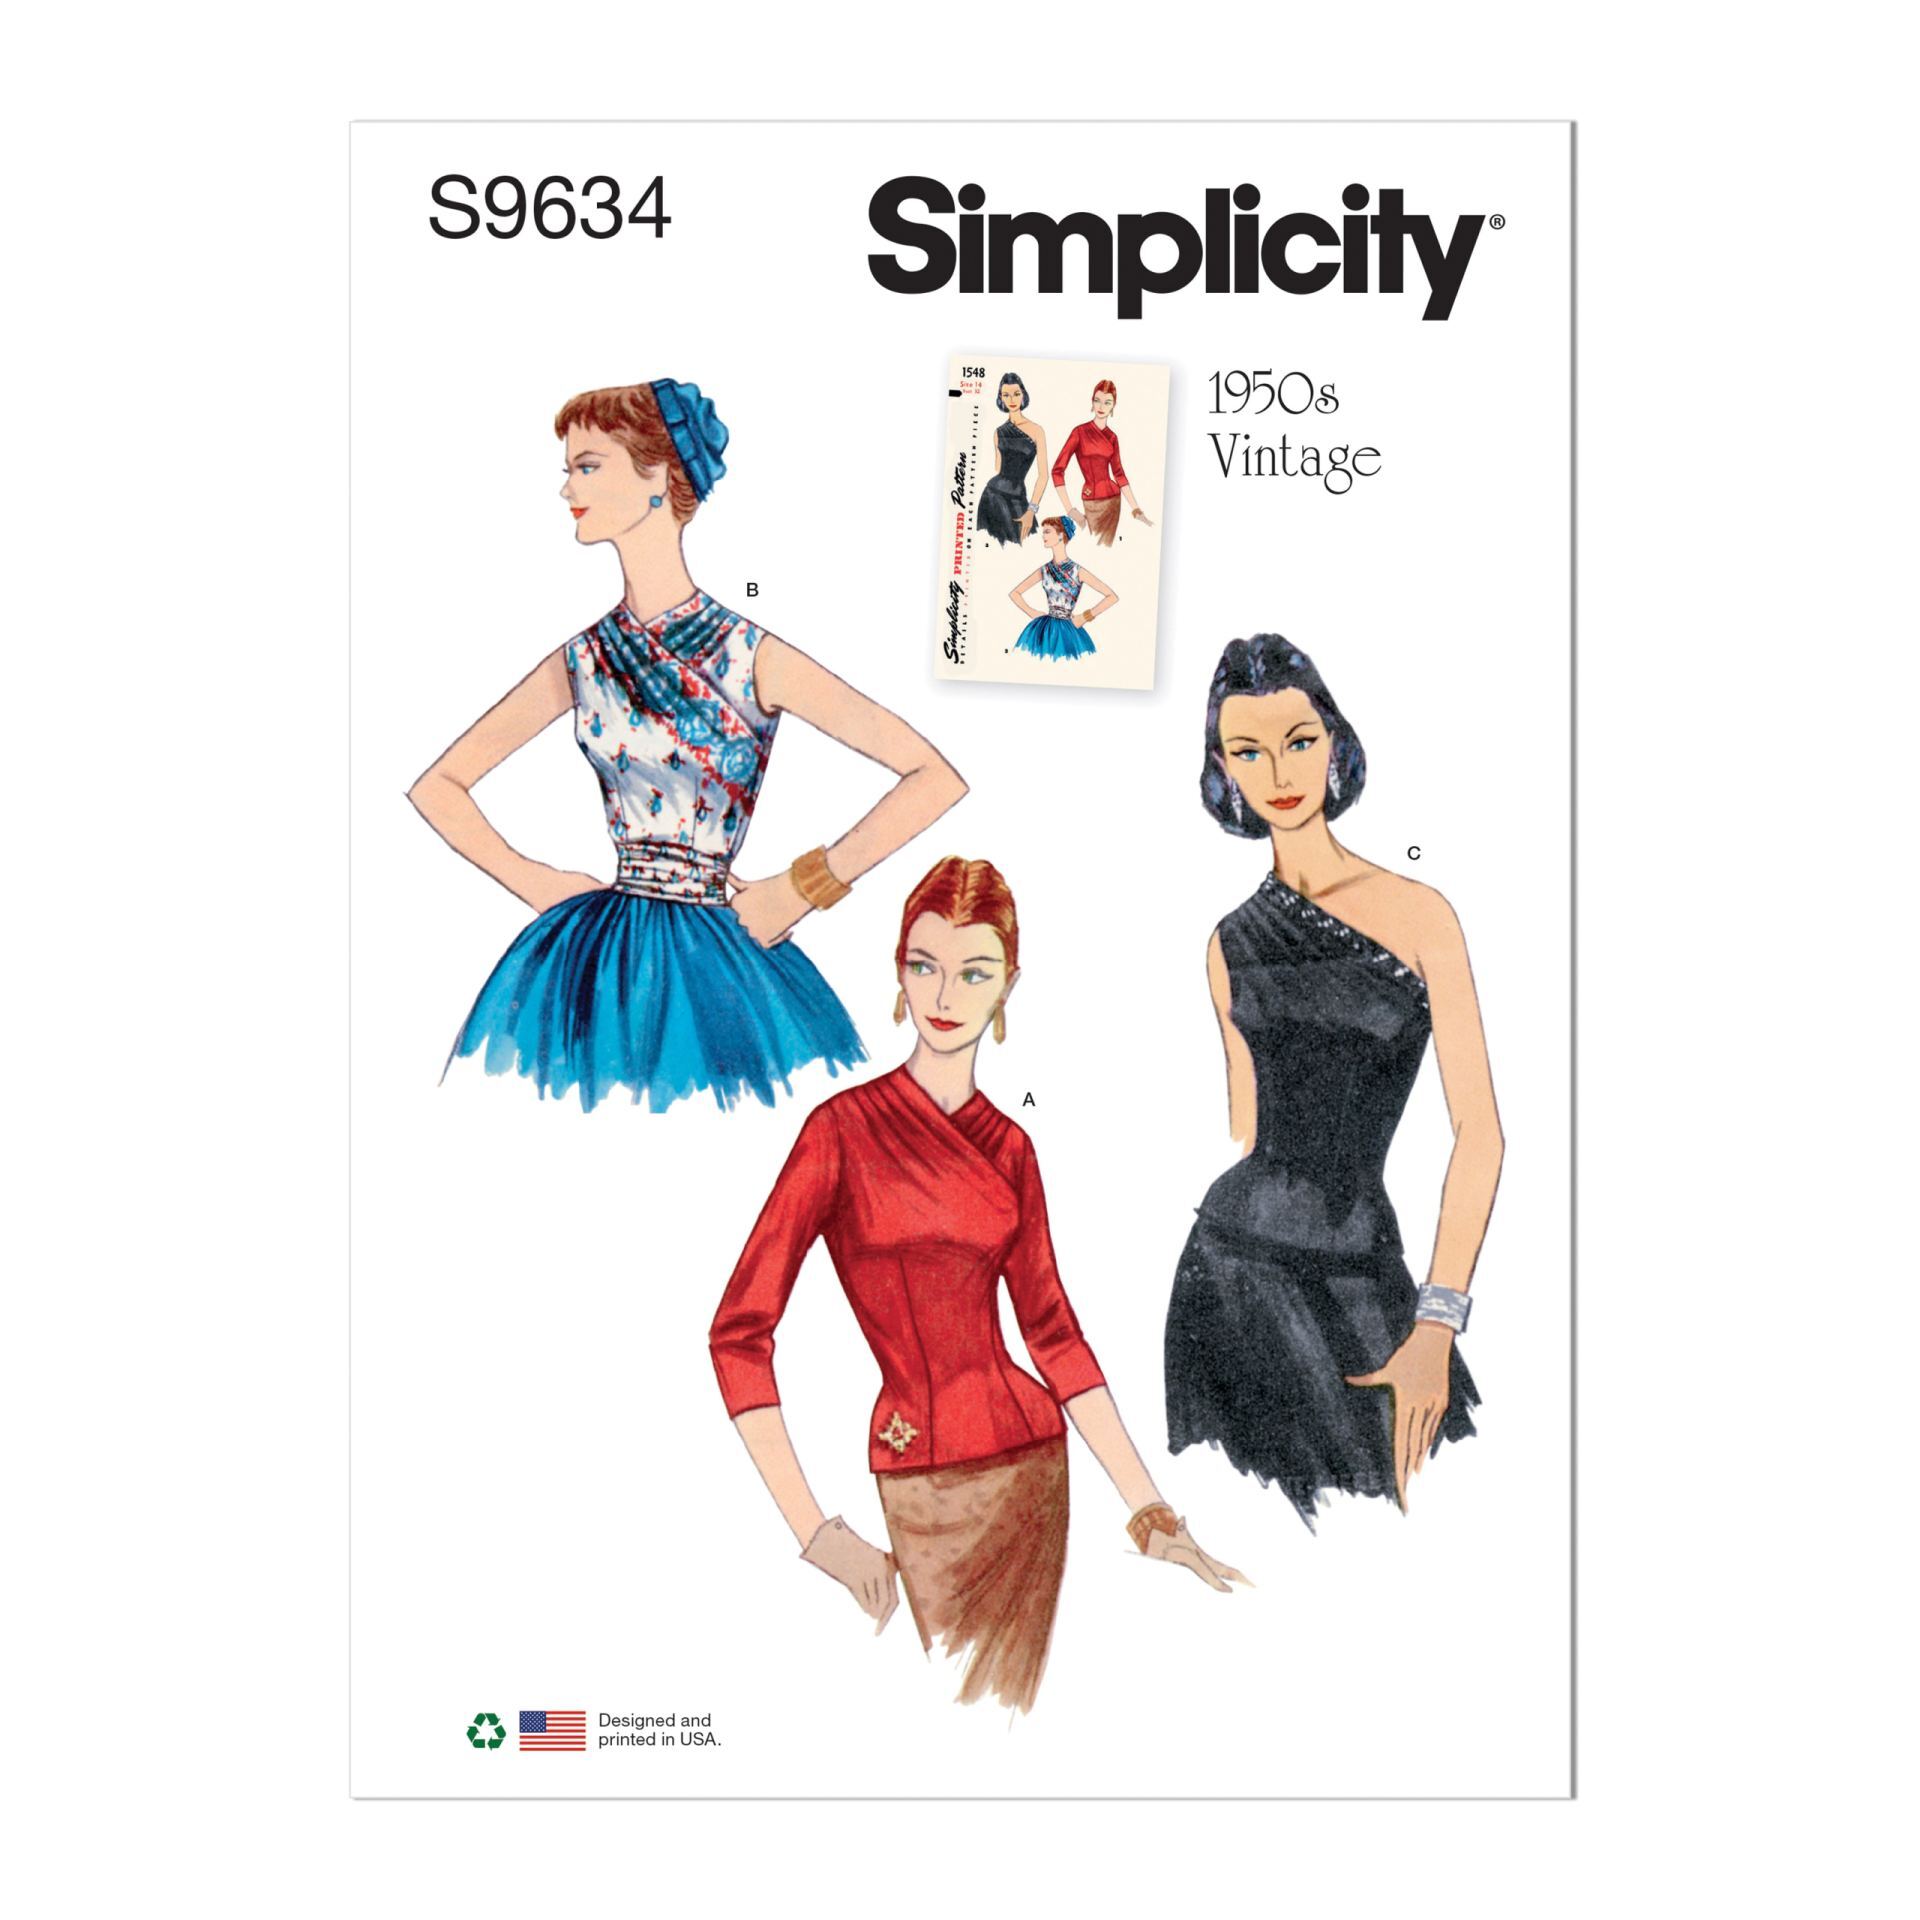 Simplicity 8456 Vintage 1950s Petticoat and Slip. Misses 4 12 or